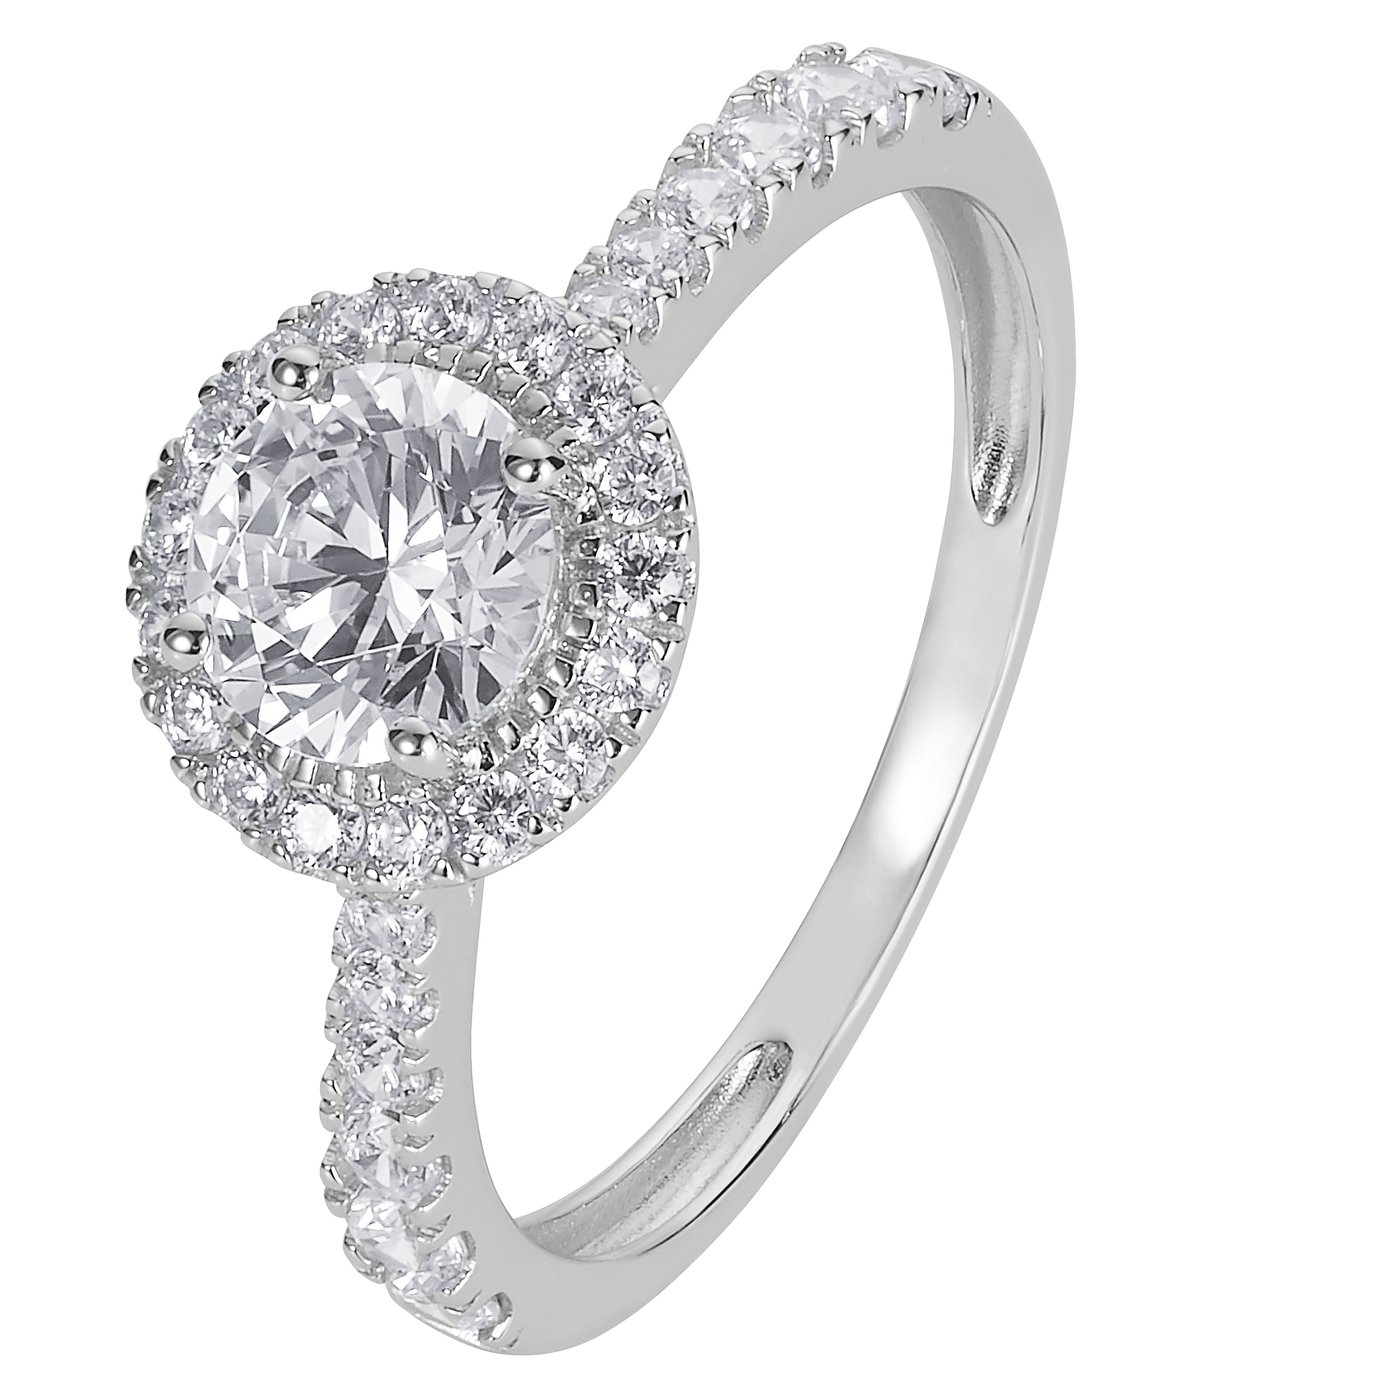 Revere 9ct White Gold Cubic Zirconia Halo Engagement Ring P